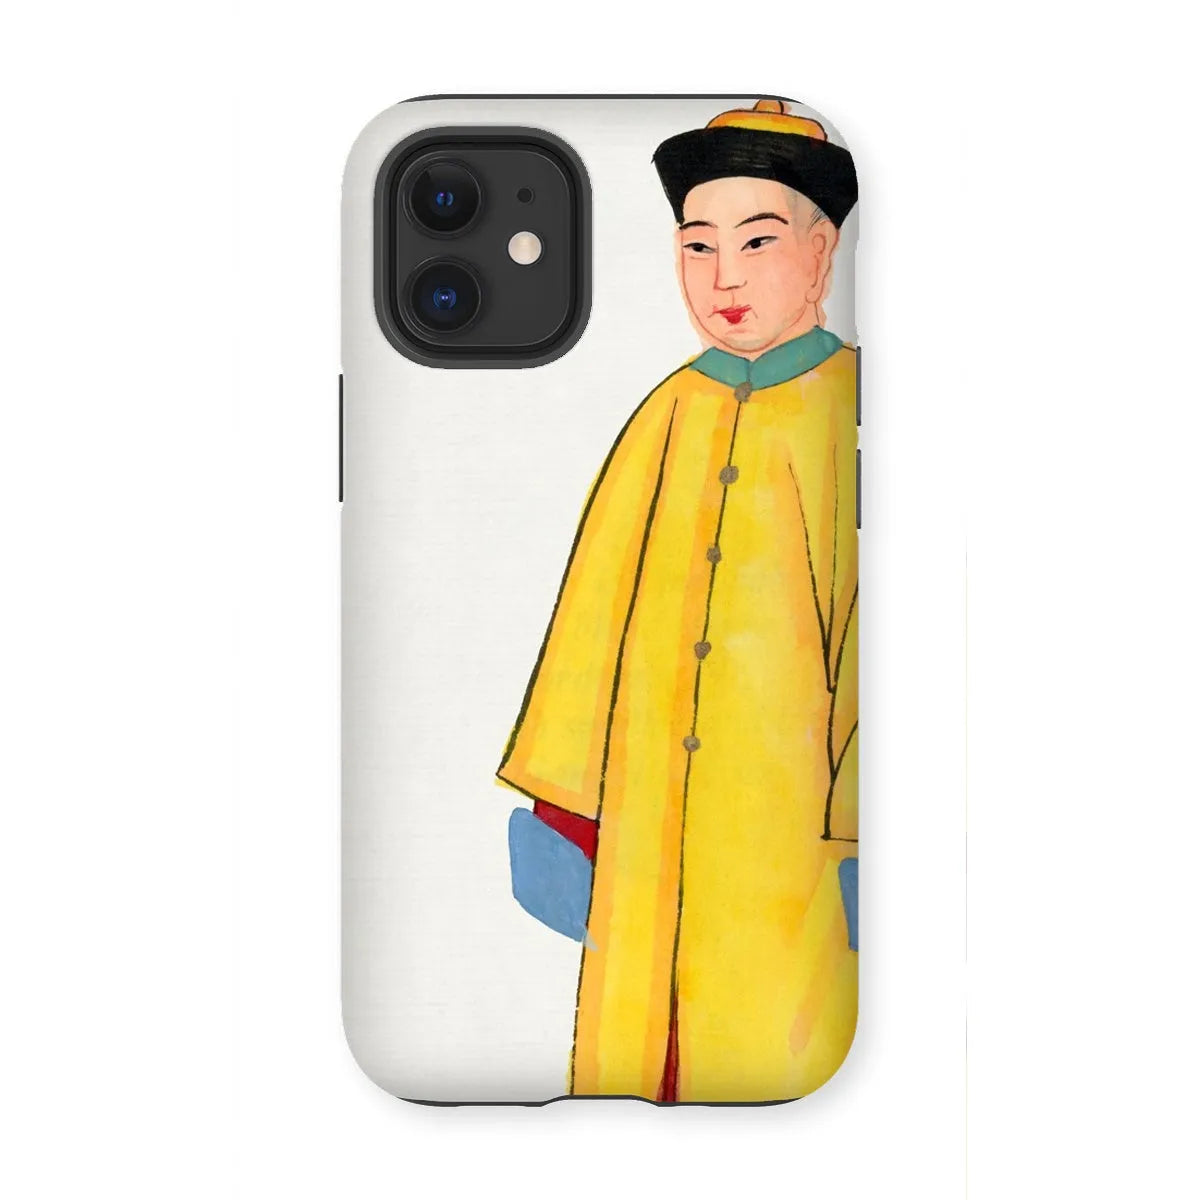 Priest In Yellow Robes - Chinese Aesthetic Art Phone Case - Iphone 12 Mini / Matte - Mobile Phone Cases - Aesthetic Art